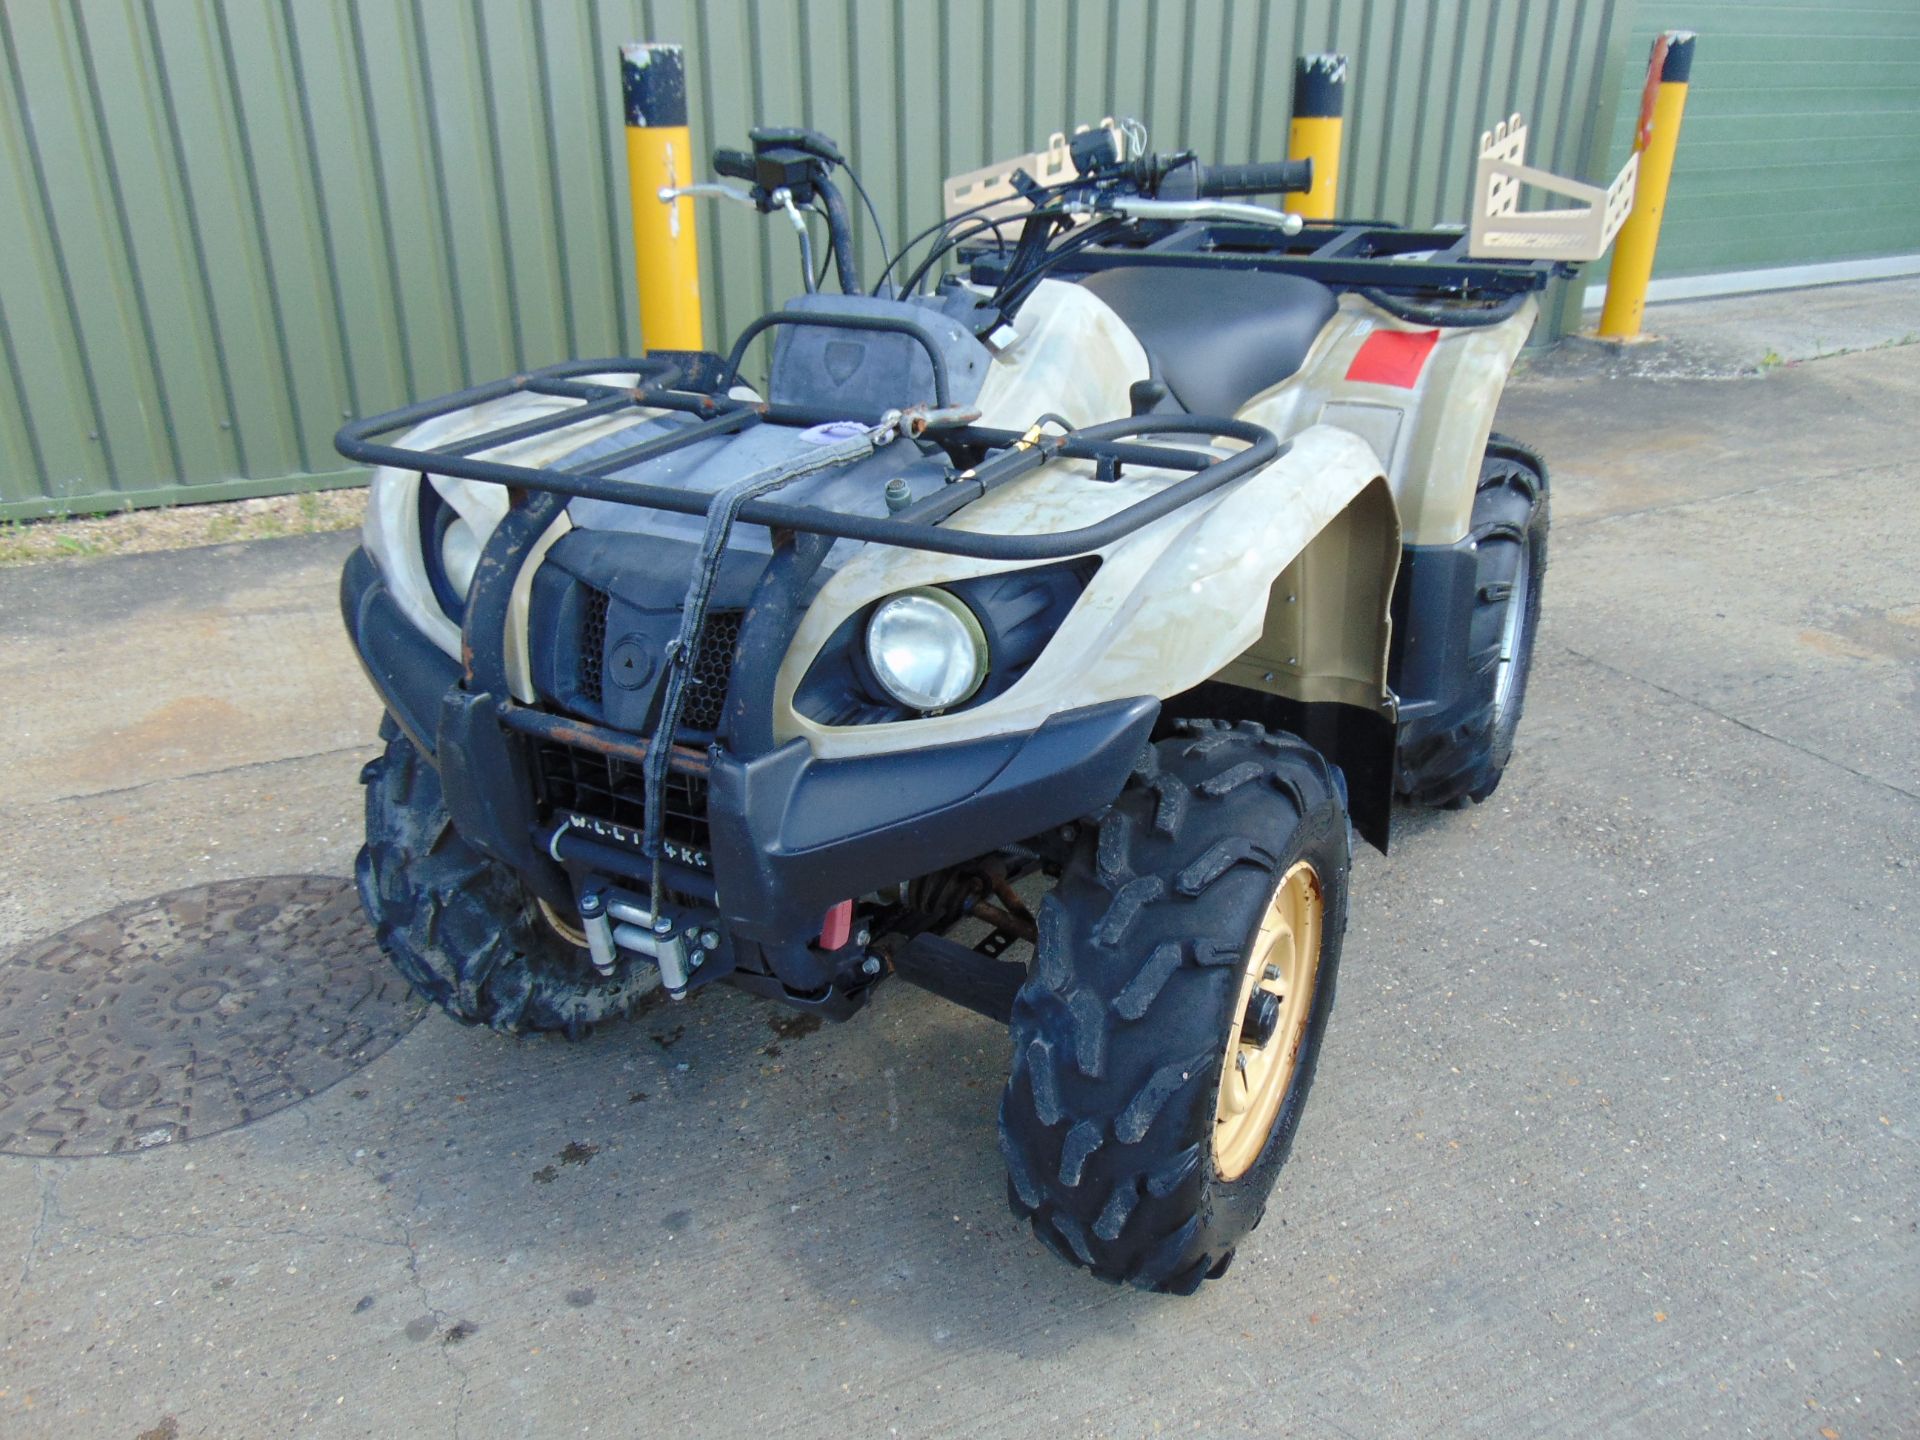 Military Specification Yamaha Grizzly 450 4 x 4 ATV Quad Bike Showing 223 hrs - Image 2 of 23